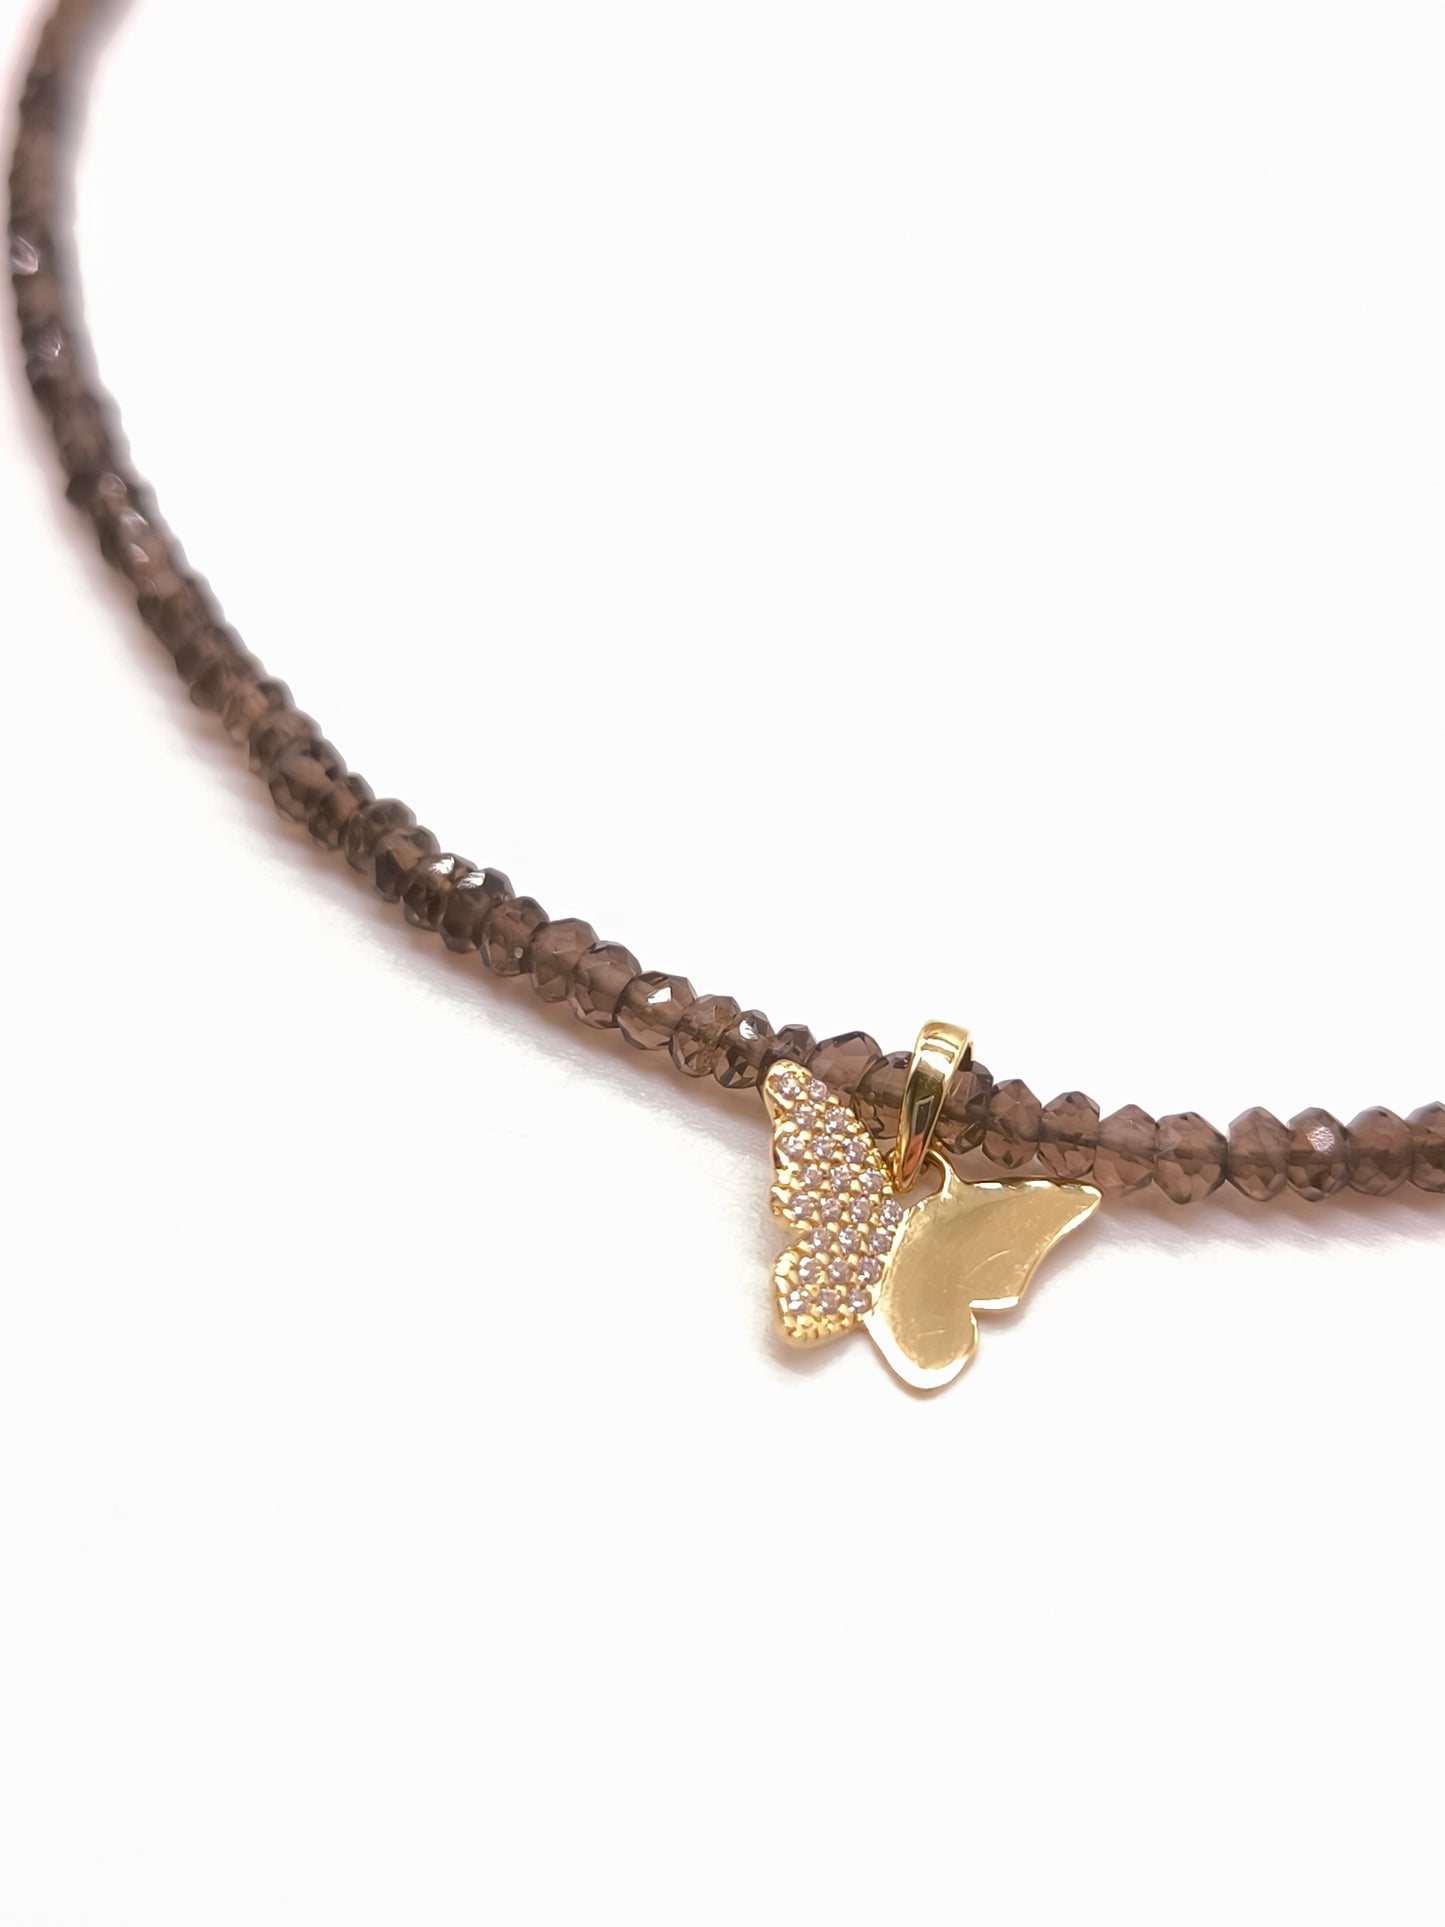 Butterfly necklace in gold and semi-precious stones